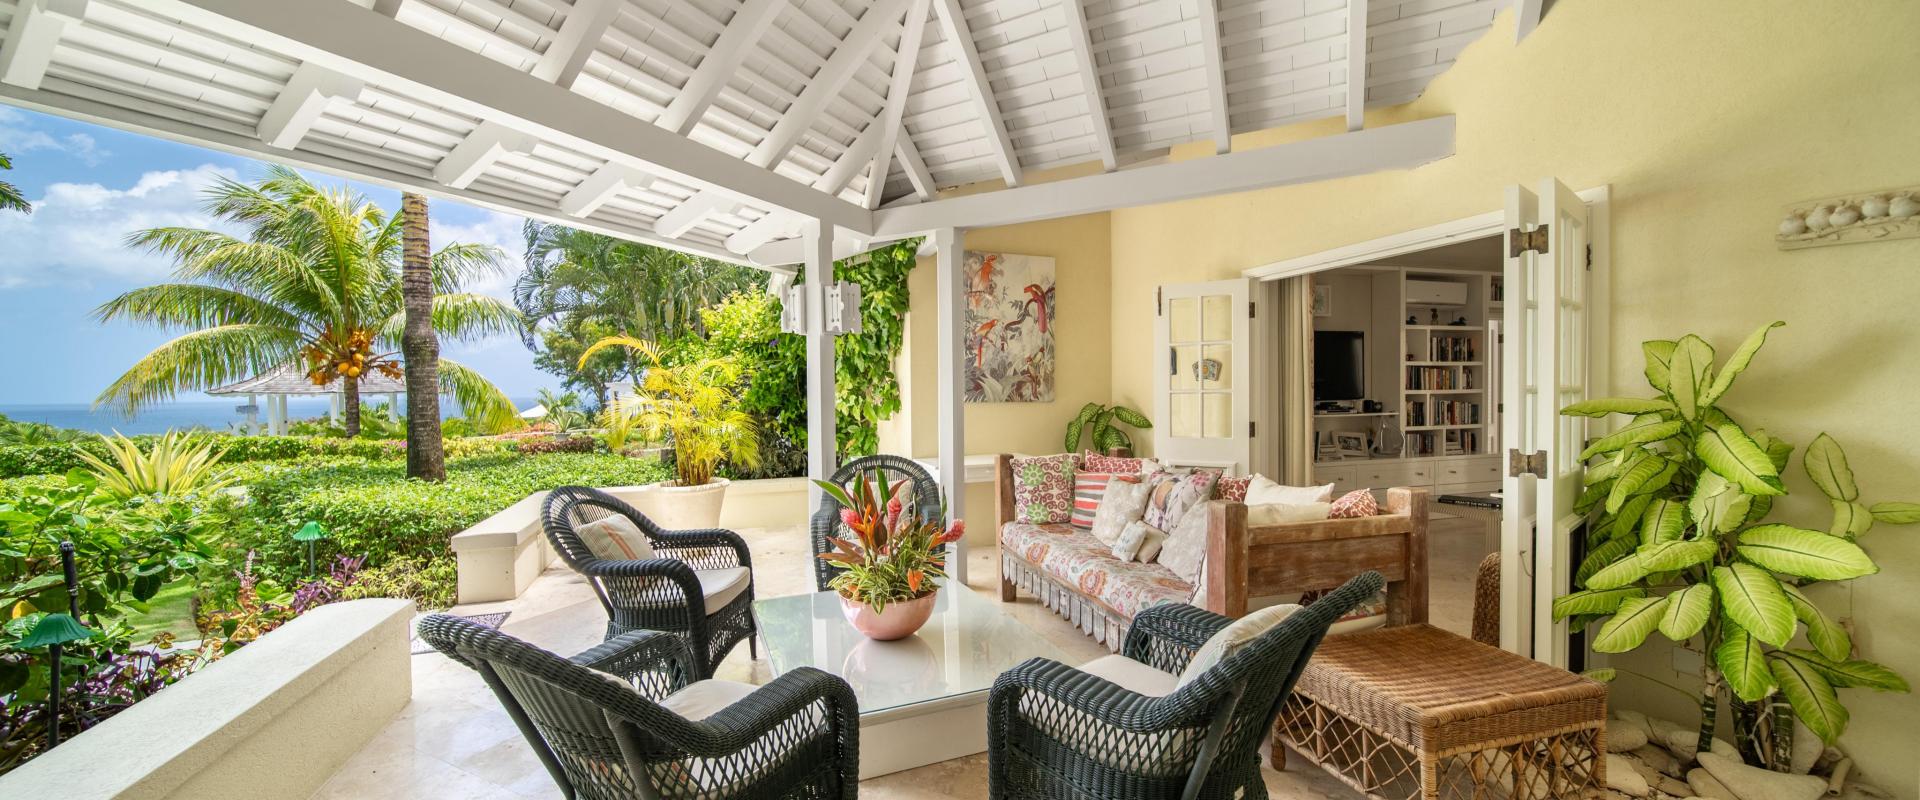 Point of View Holiday Rental In Sandy Lane Barbados TV Room covered Patio with Ocean and Garden Views